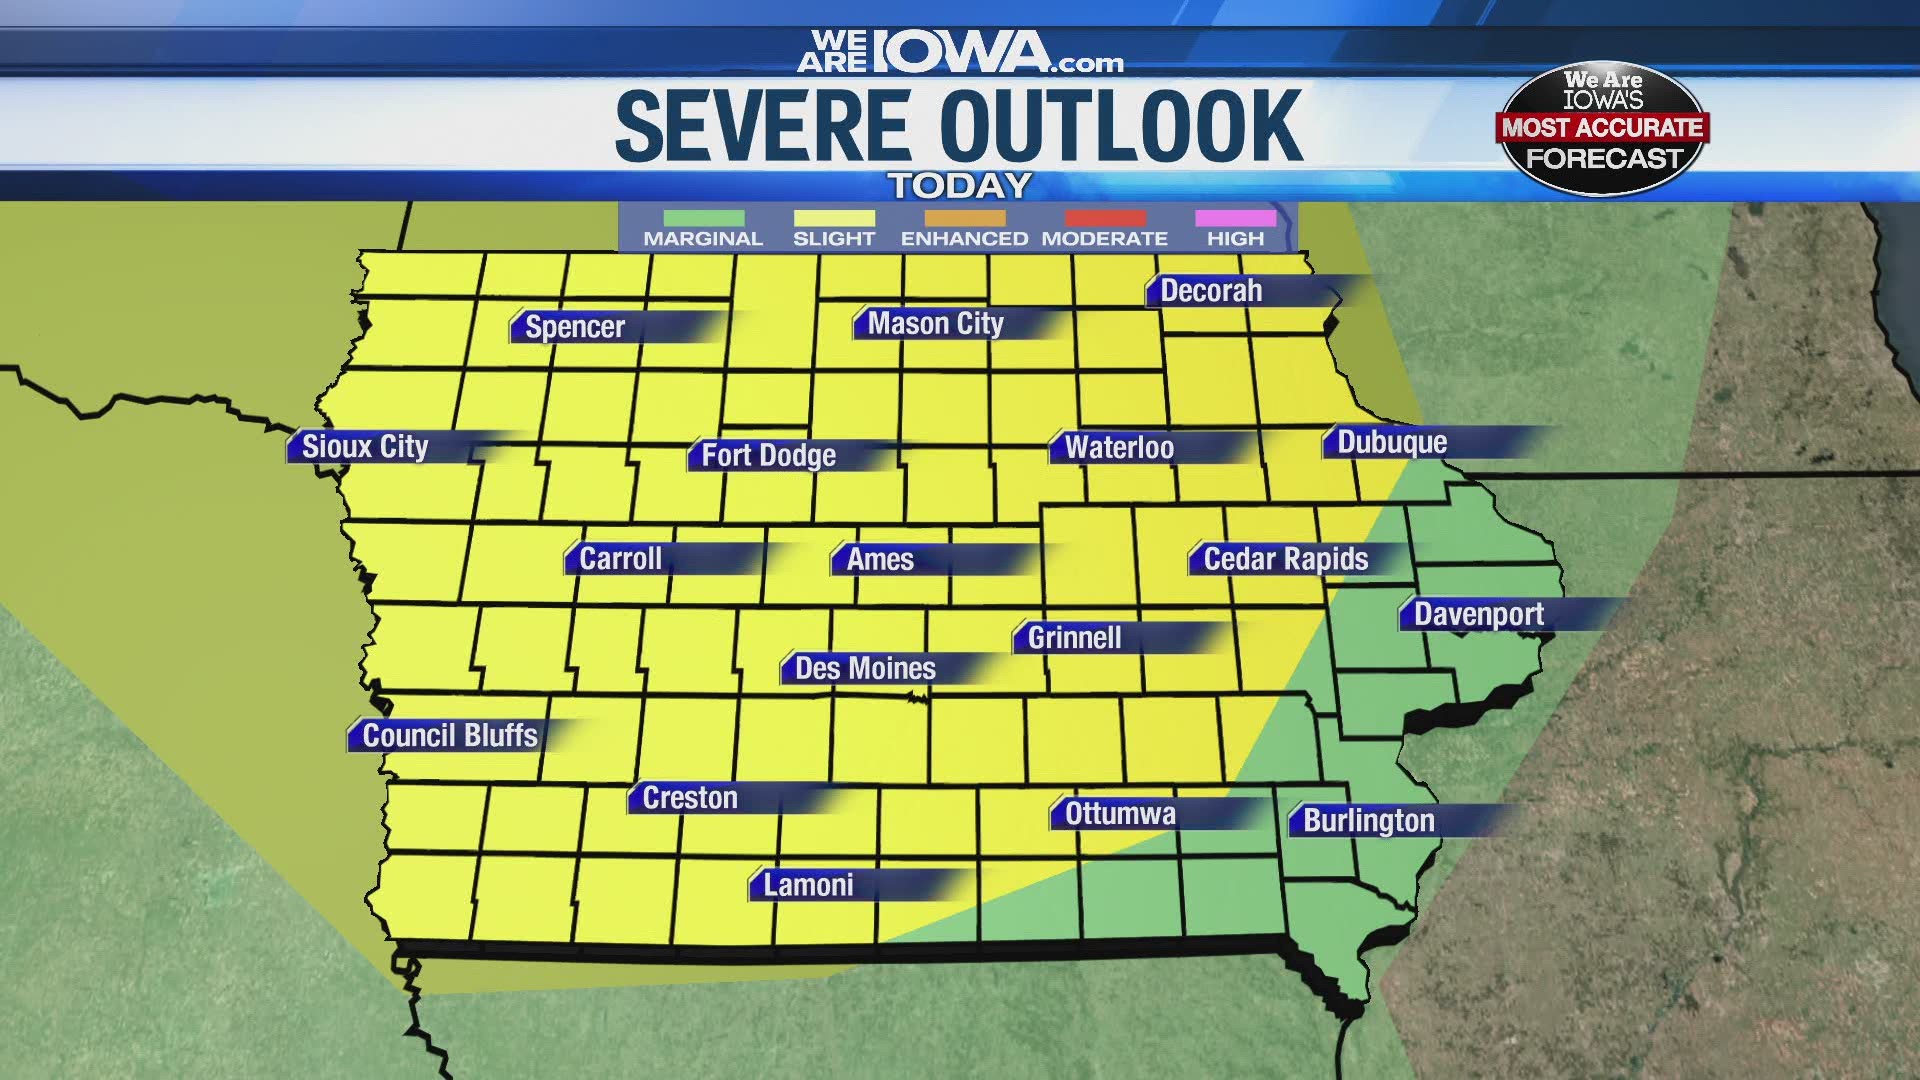 Another round of severe weather possible Thursday night